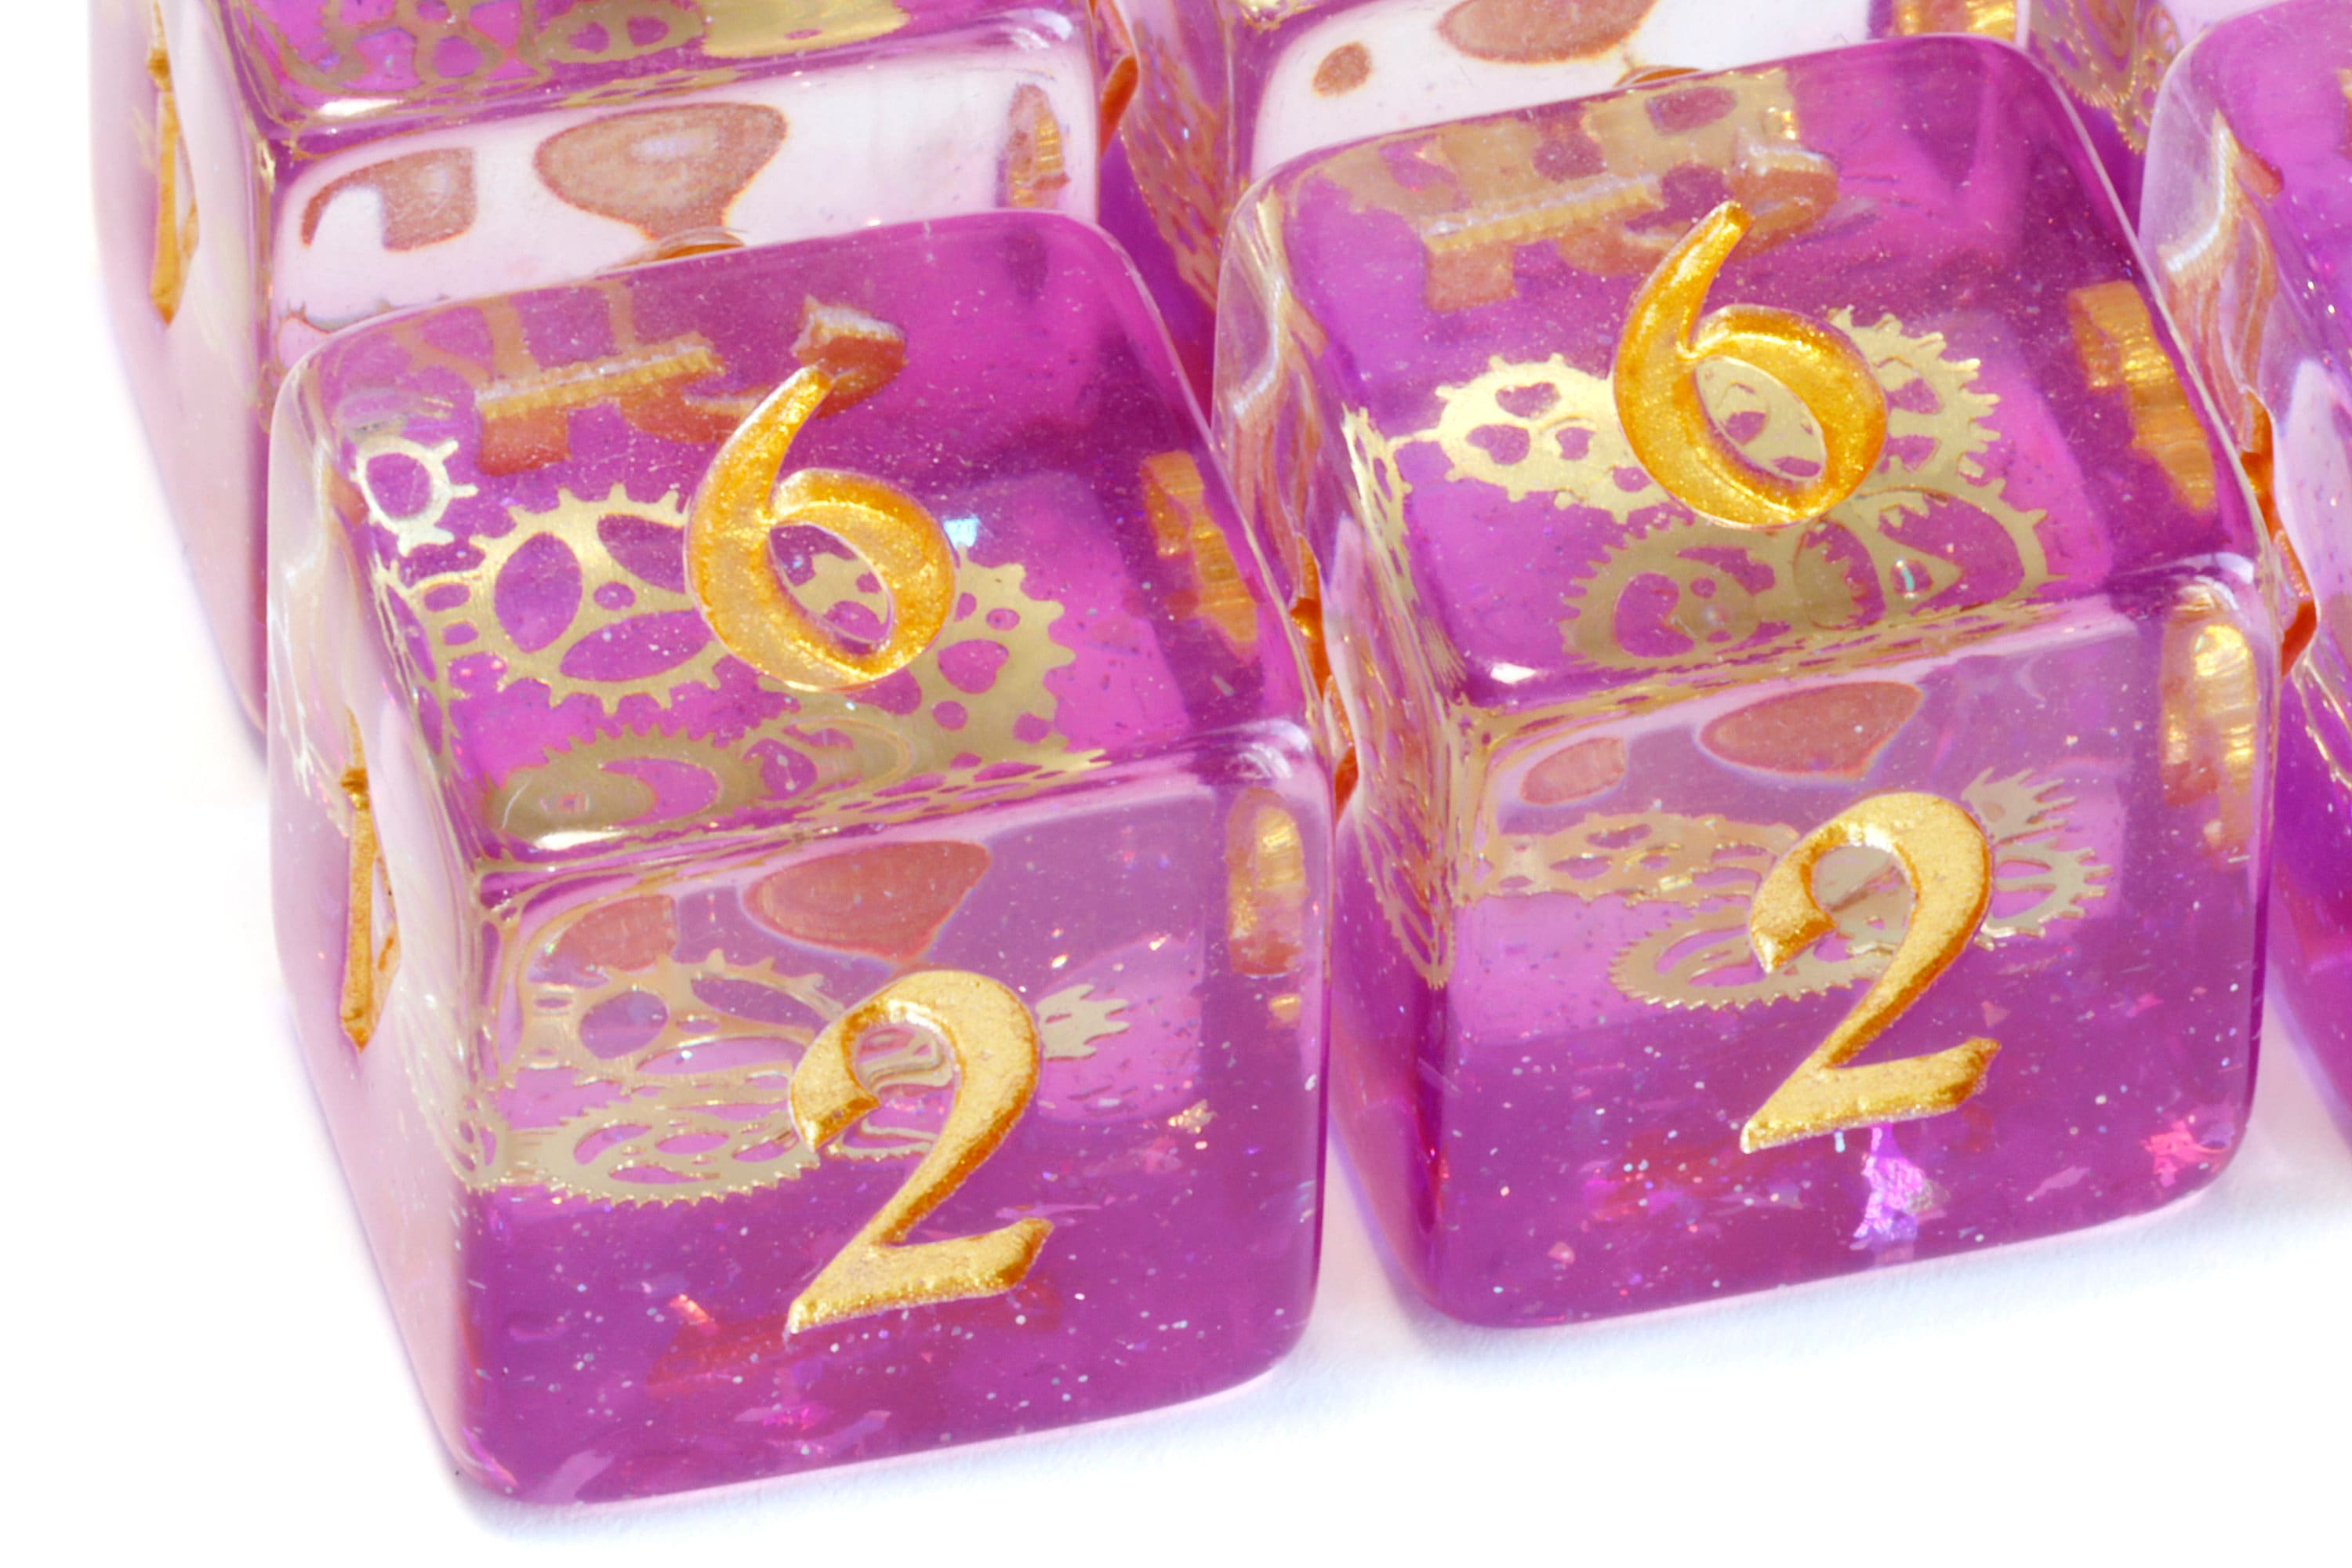 Arcane Sprockets D6 Dice, Purple glittery layer with small golden gear